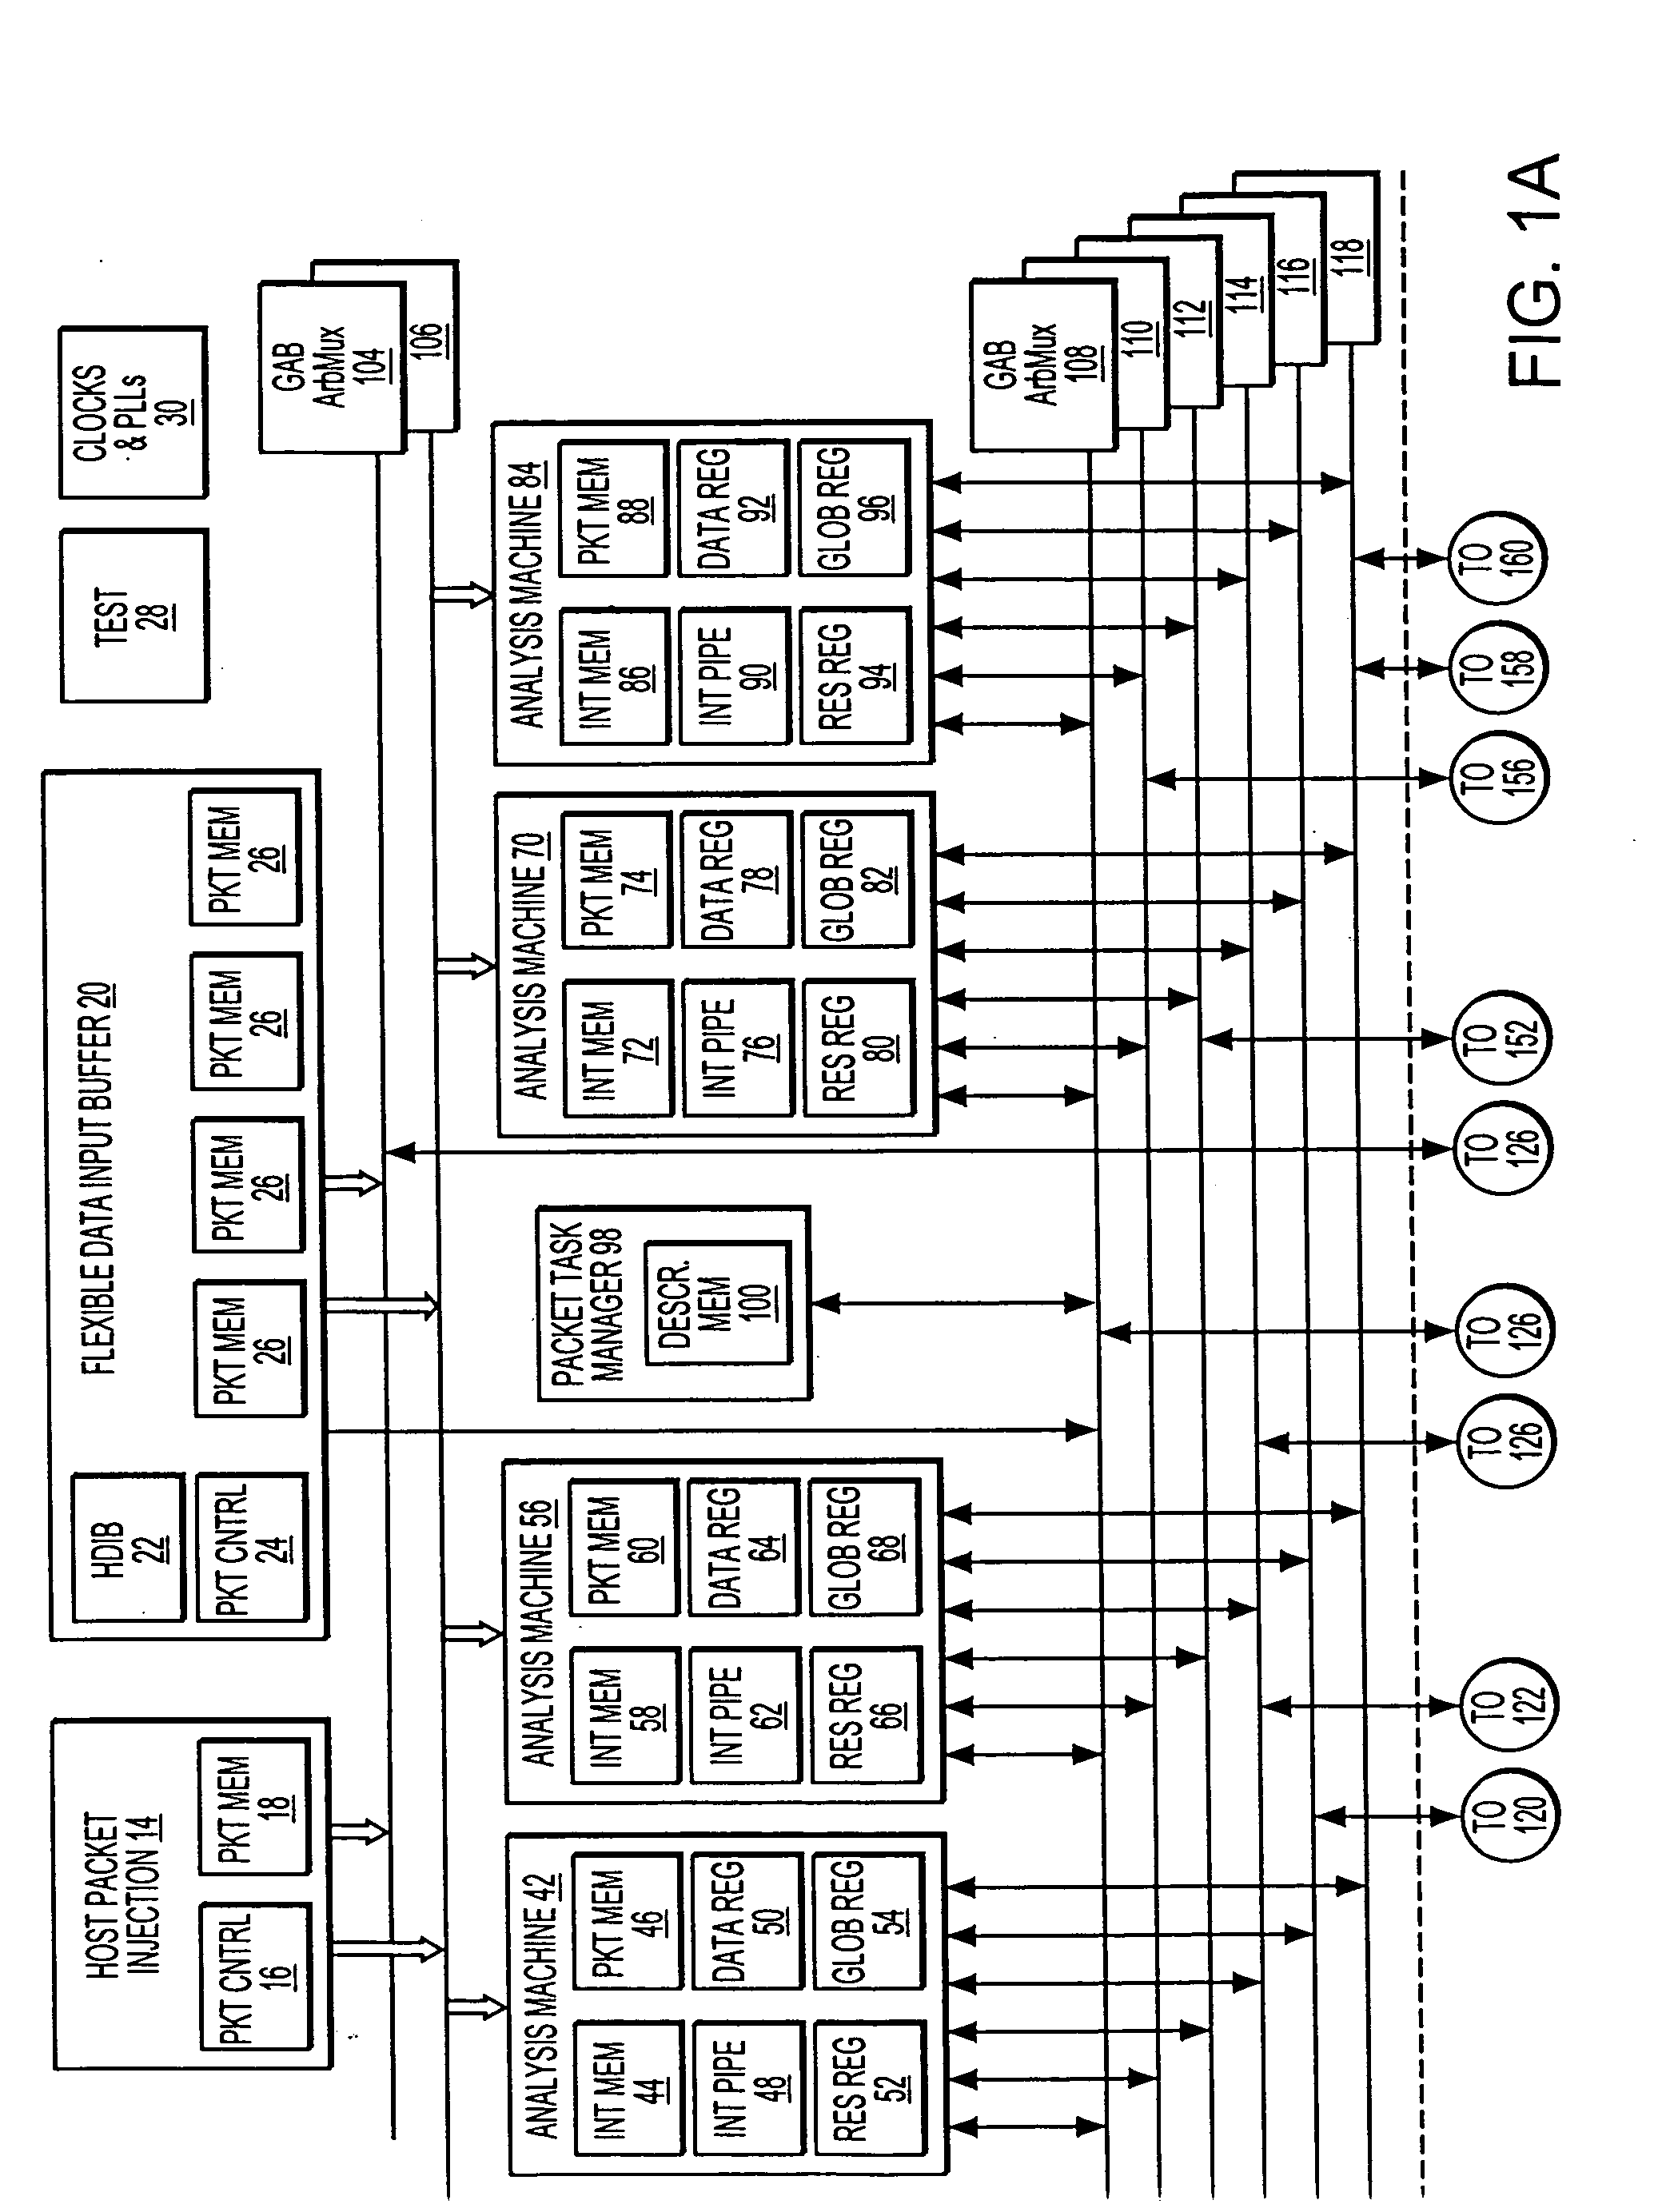 External memory engine selectable pipeline architecture